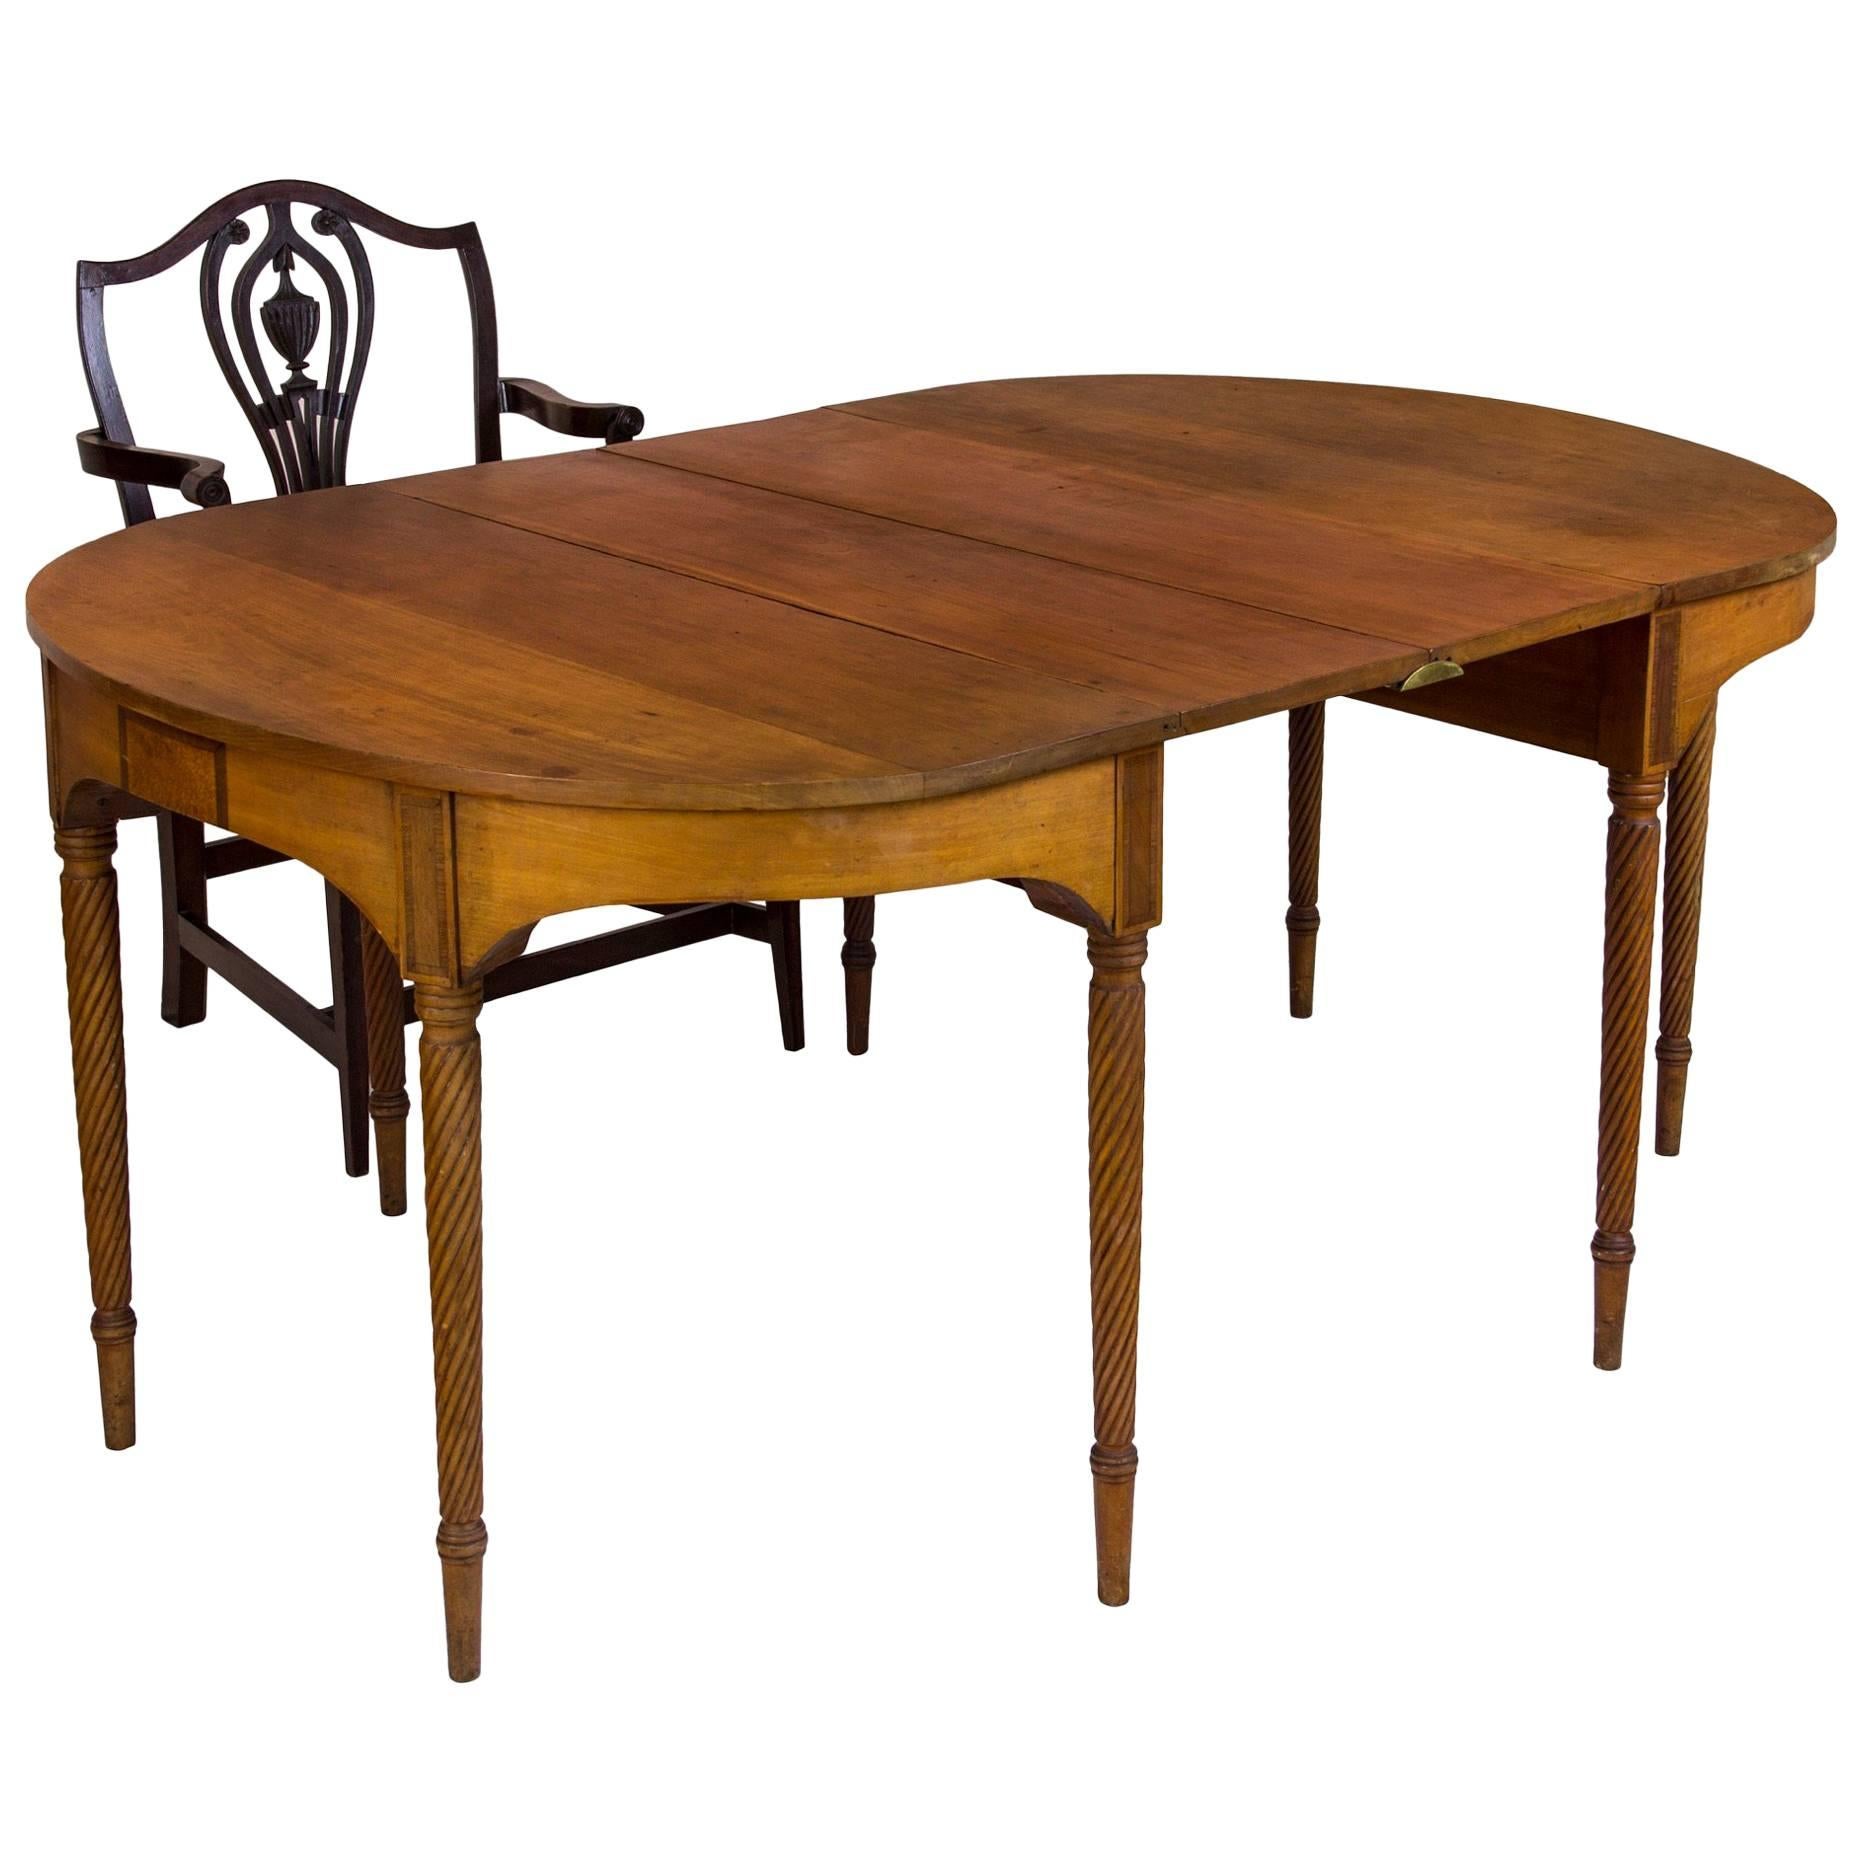 Sheraton Cherry Inlaid Banquet Table of Small Scale with Rope-Tuned Legs, 1815 For Sale